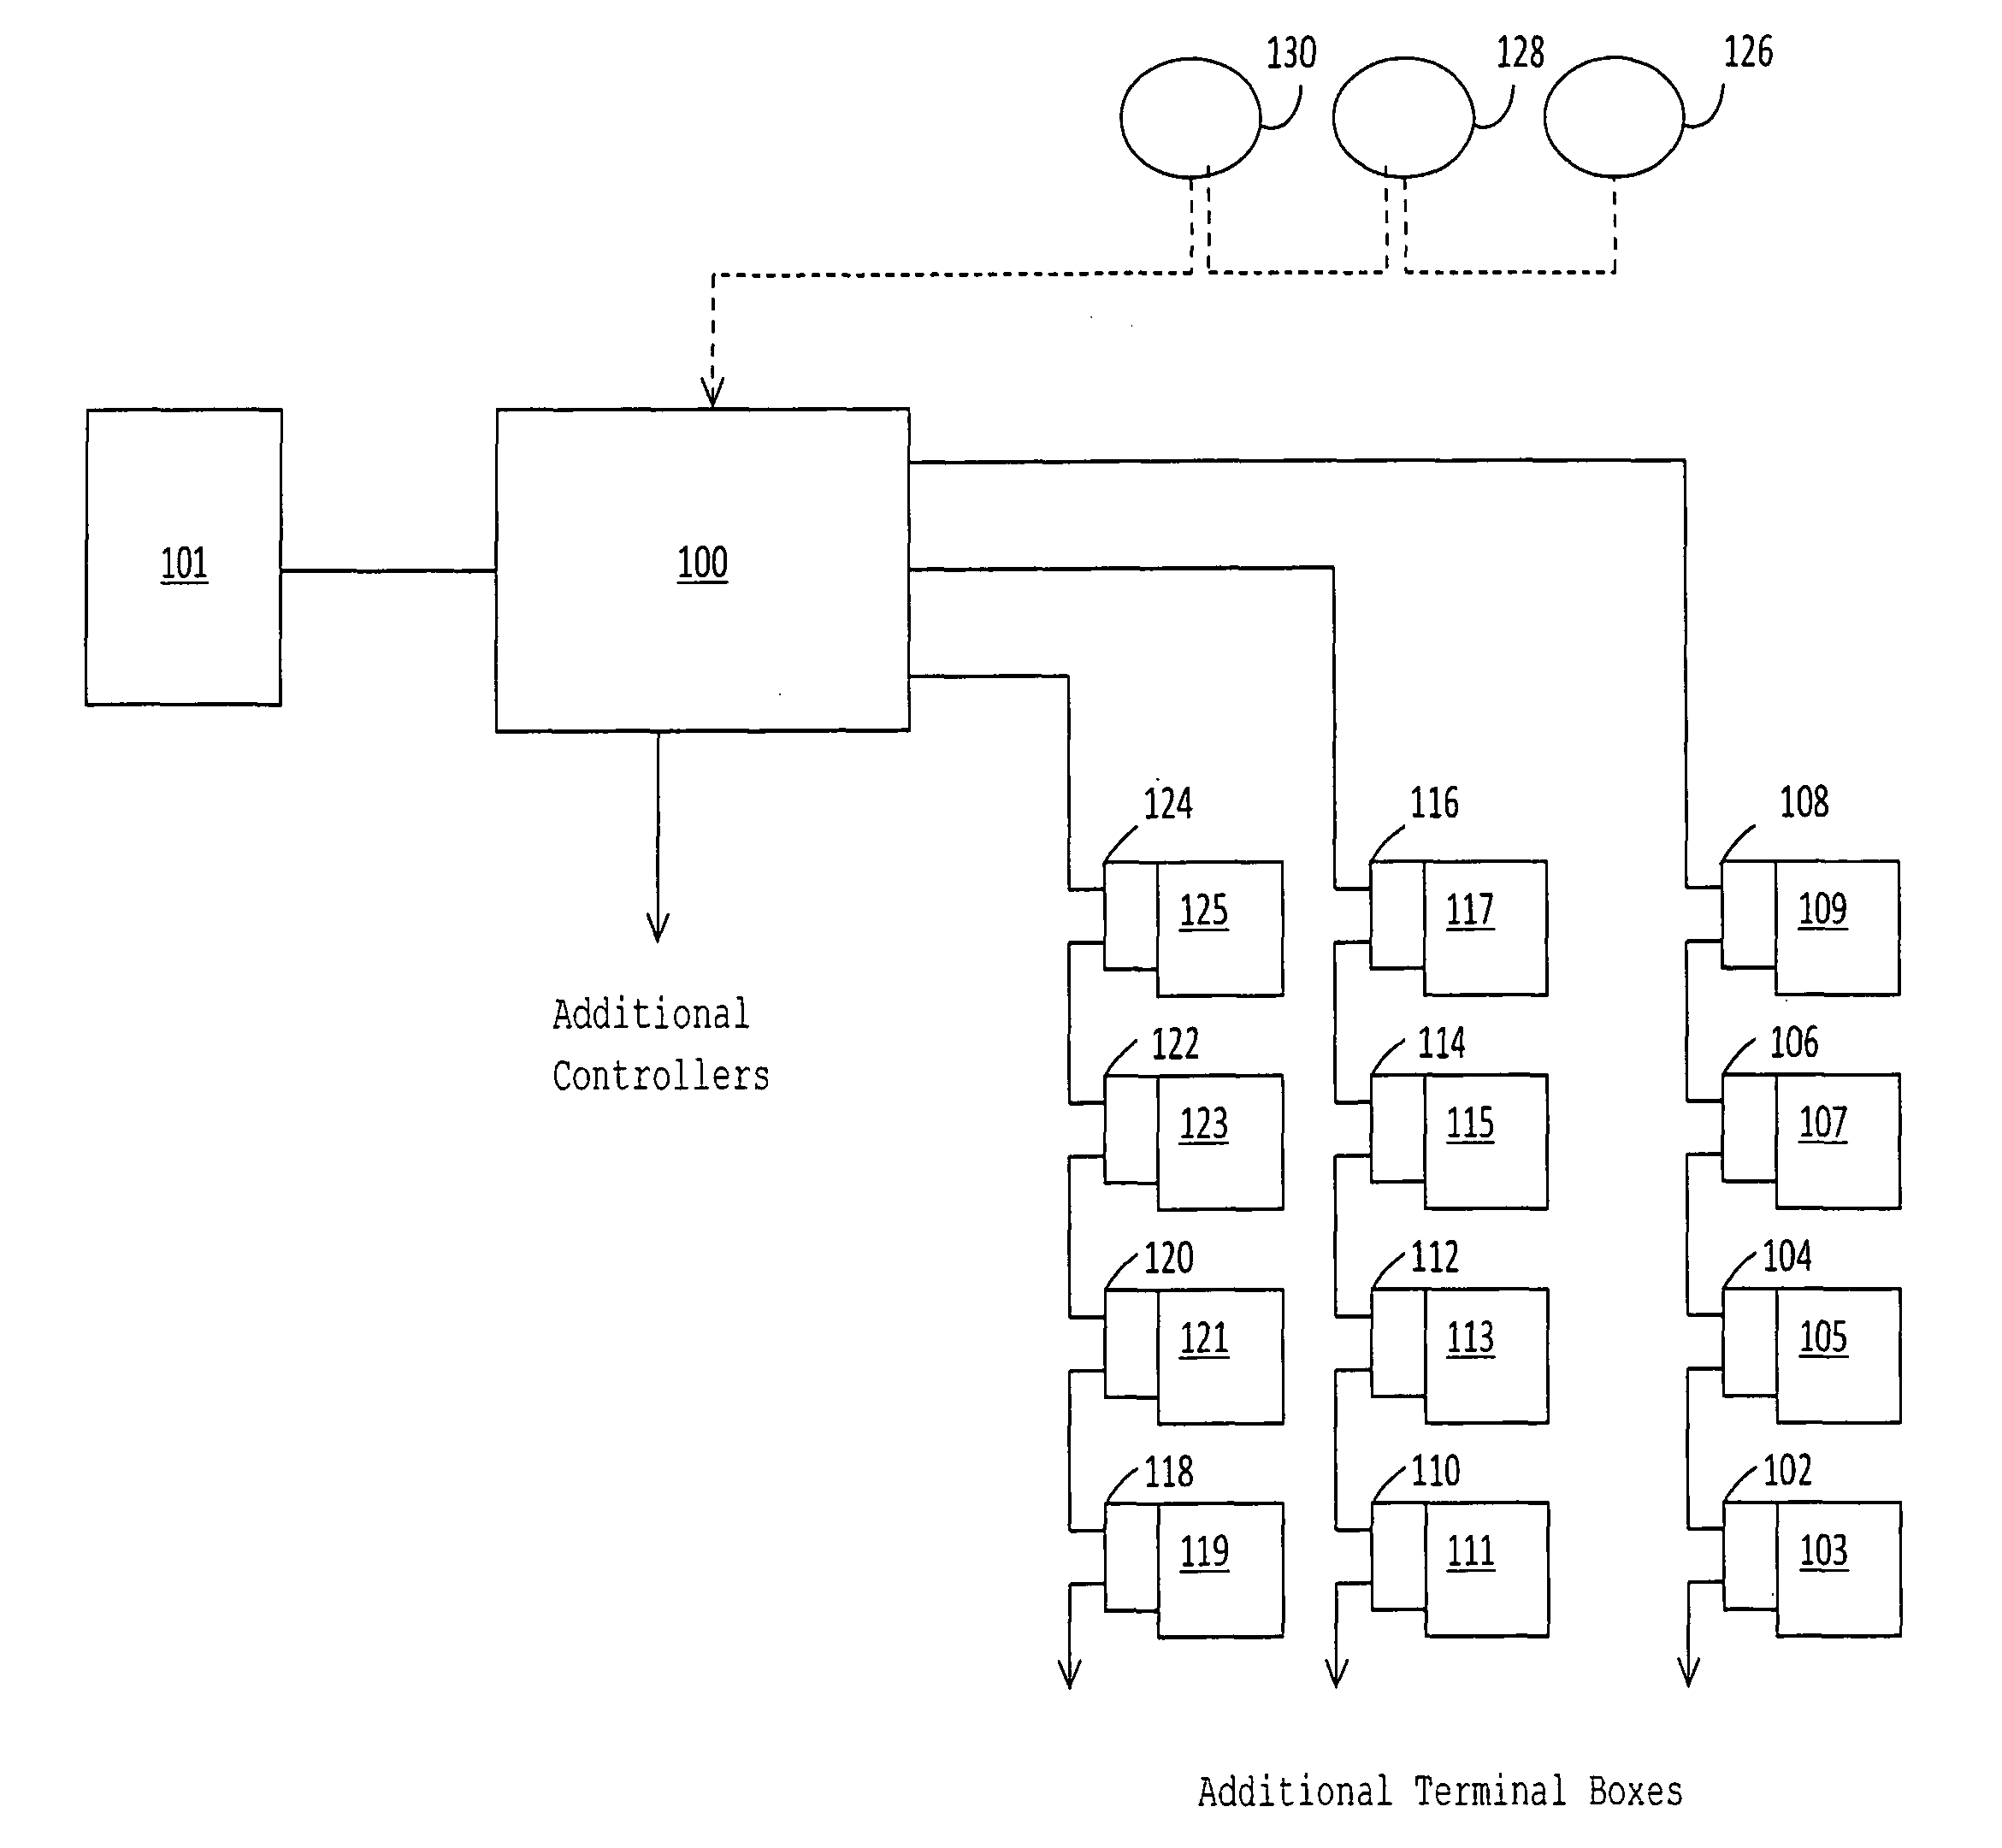 Fresh air control device and algorithm for air handling units and terminal boxes